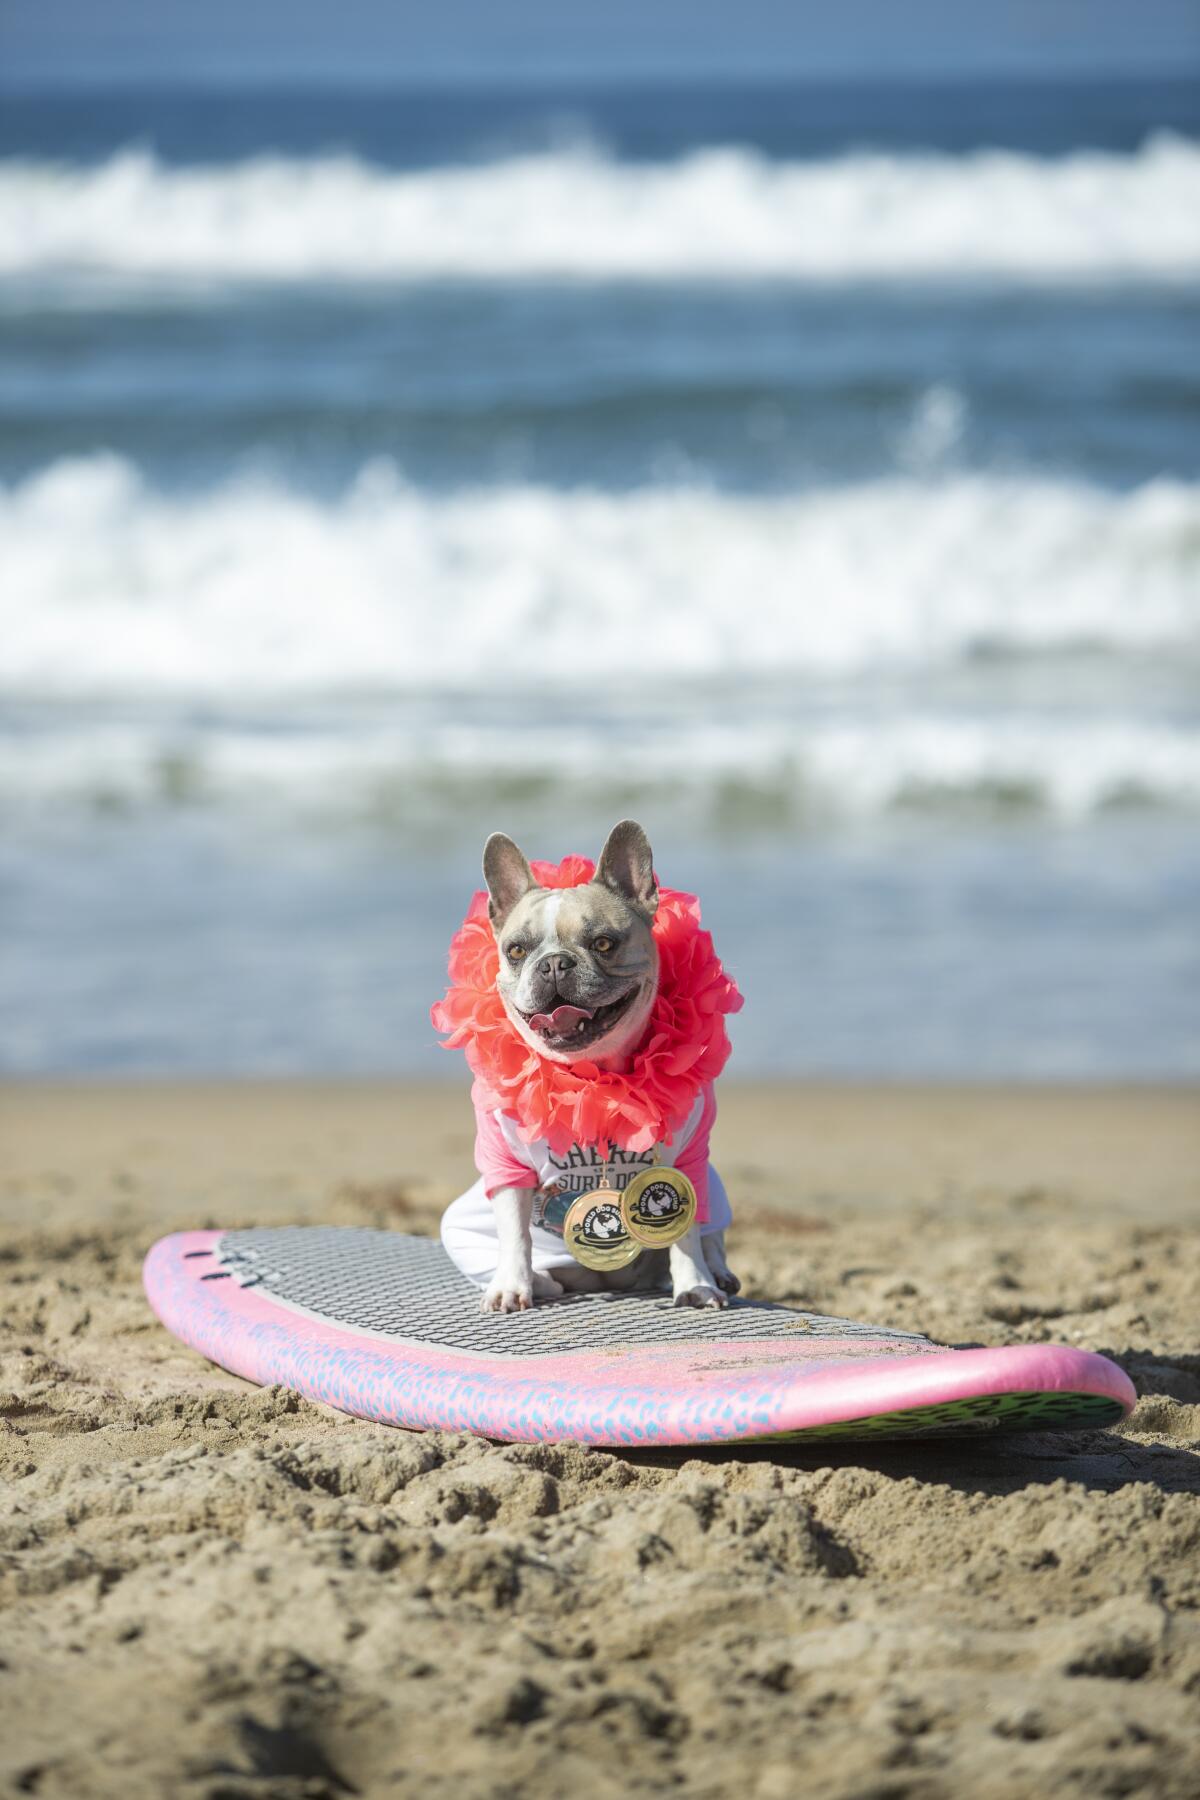 Cherie, winner of the World Dog Surfing Championships this month, sports her medals.